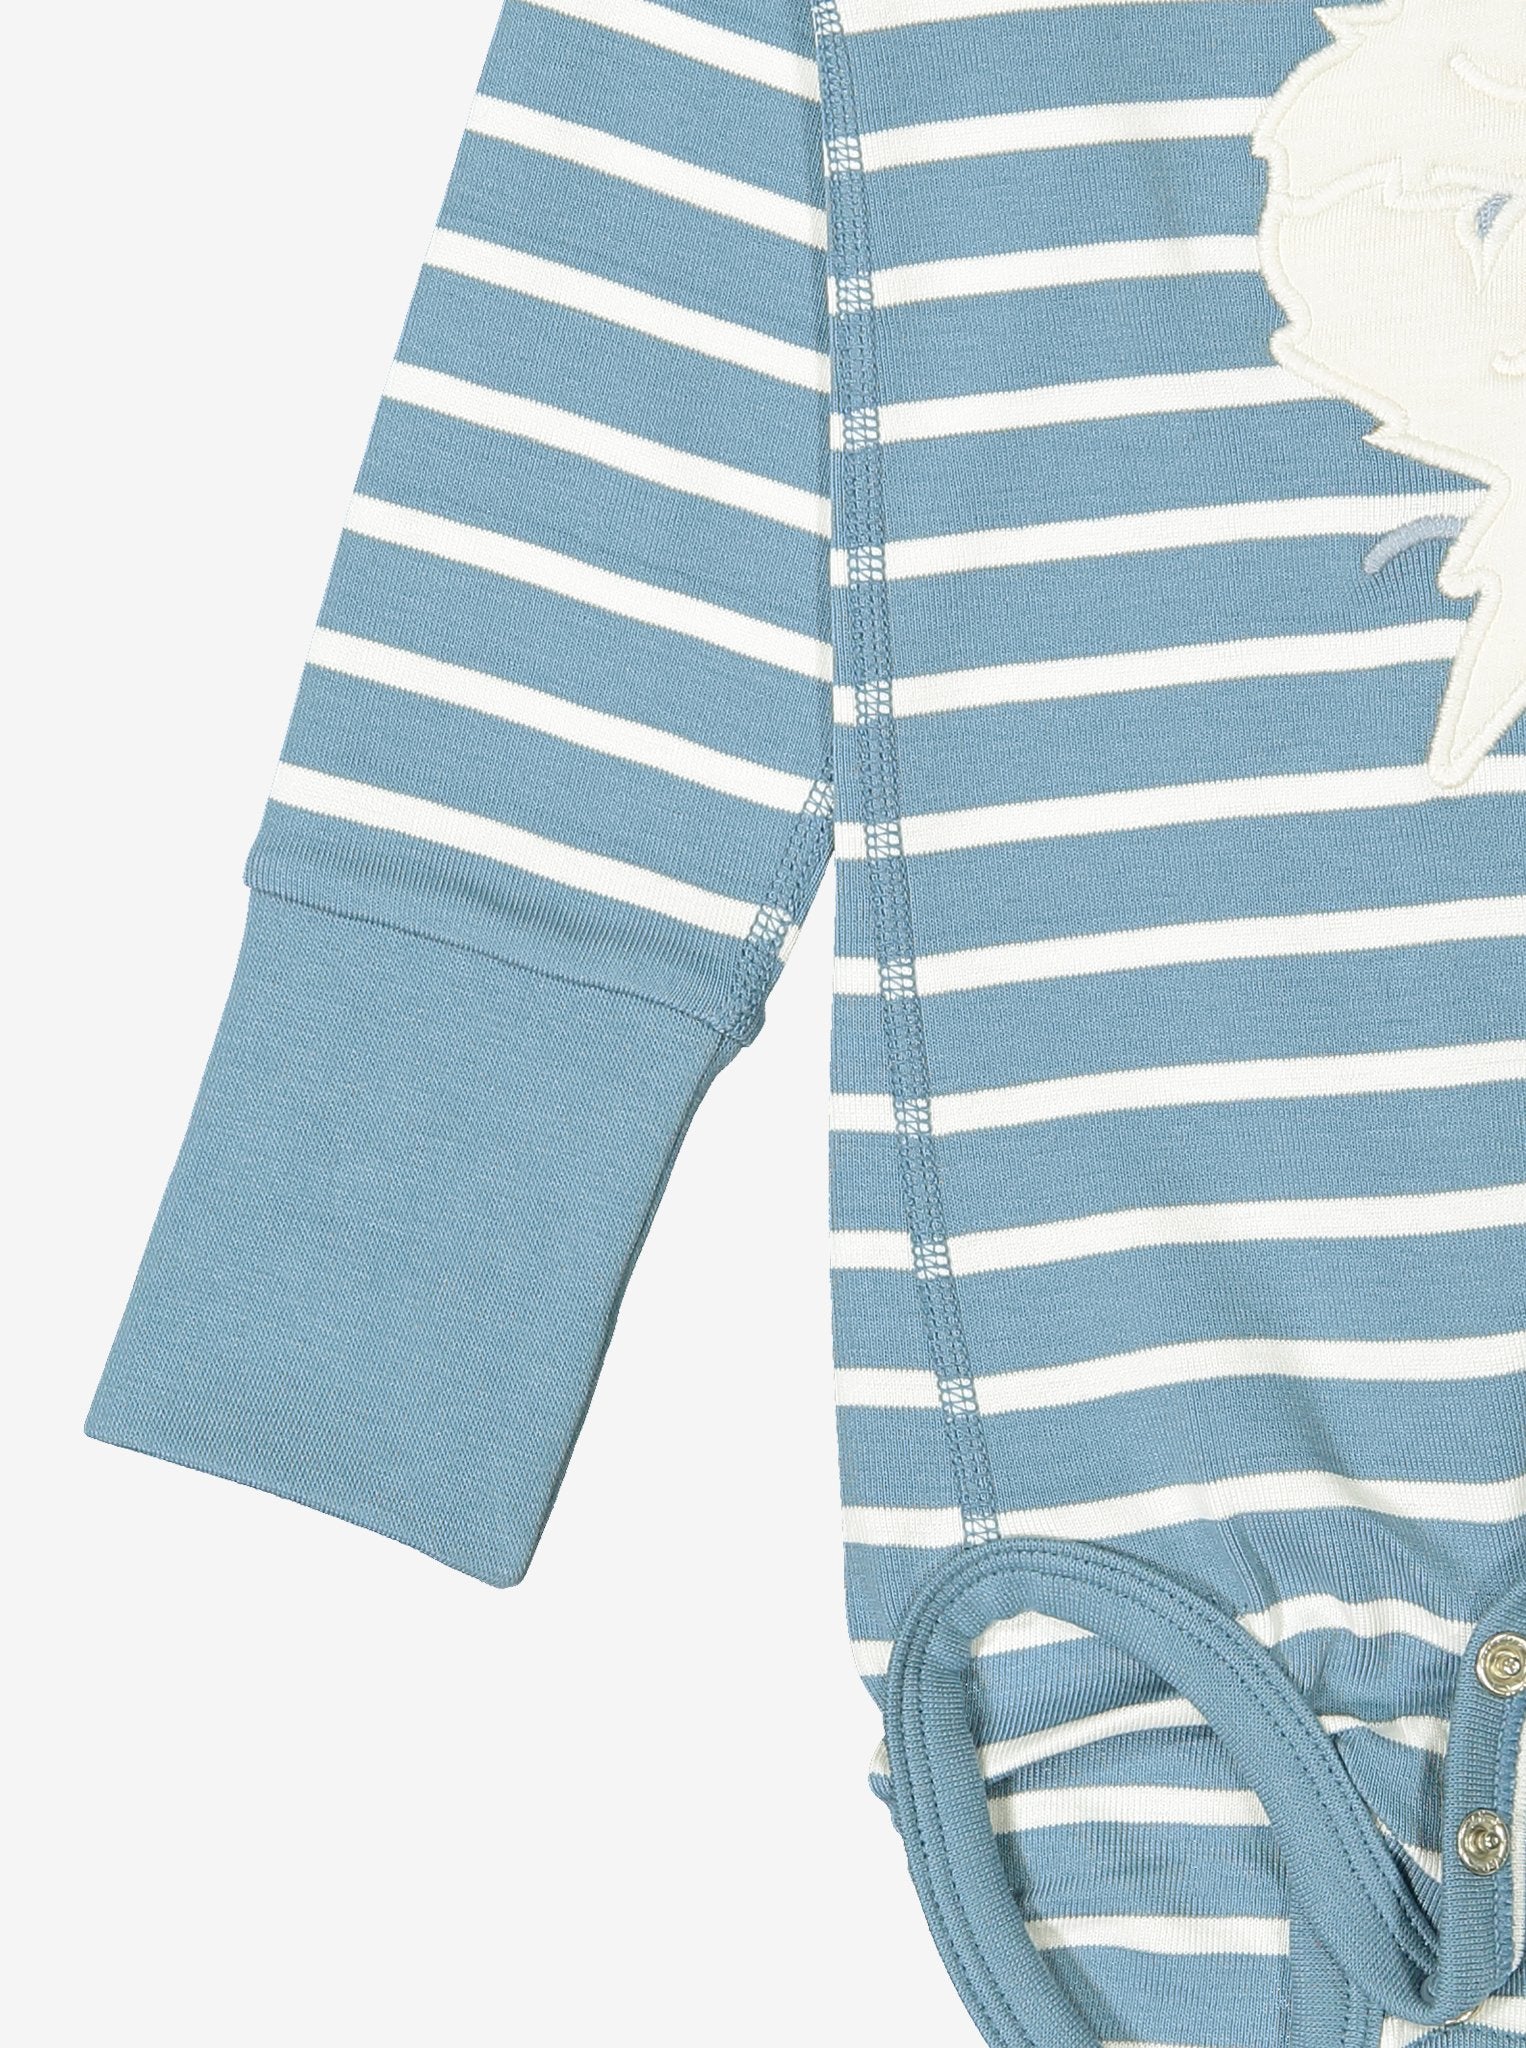 Blue and white striped babygrow showing close of of unique fold-over cuffs giving lots of growing room